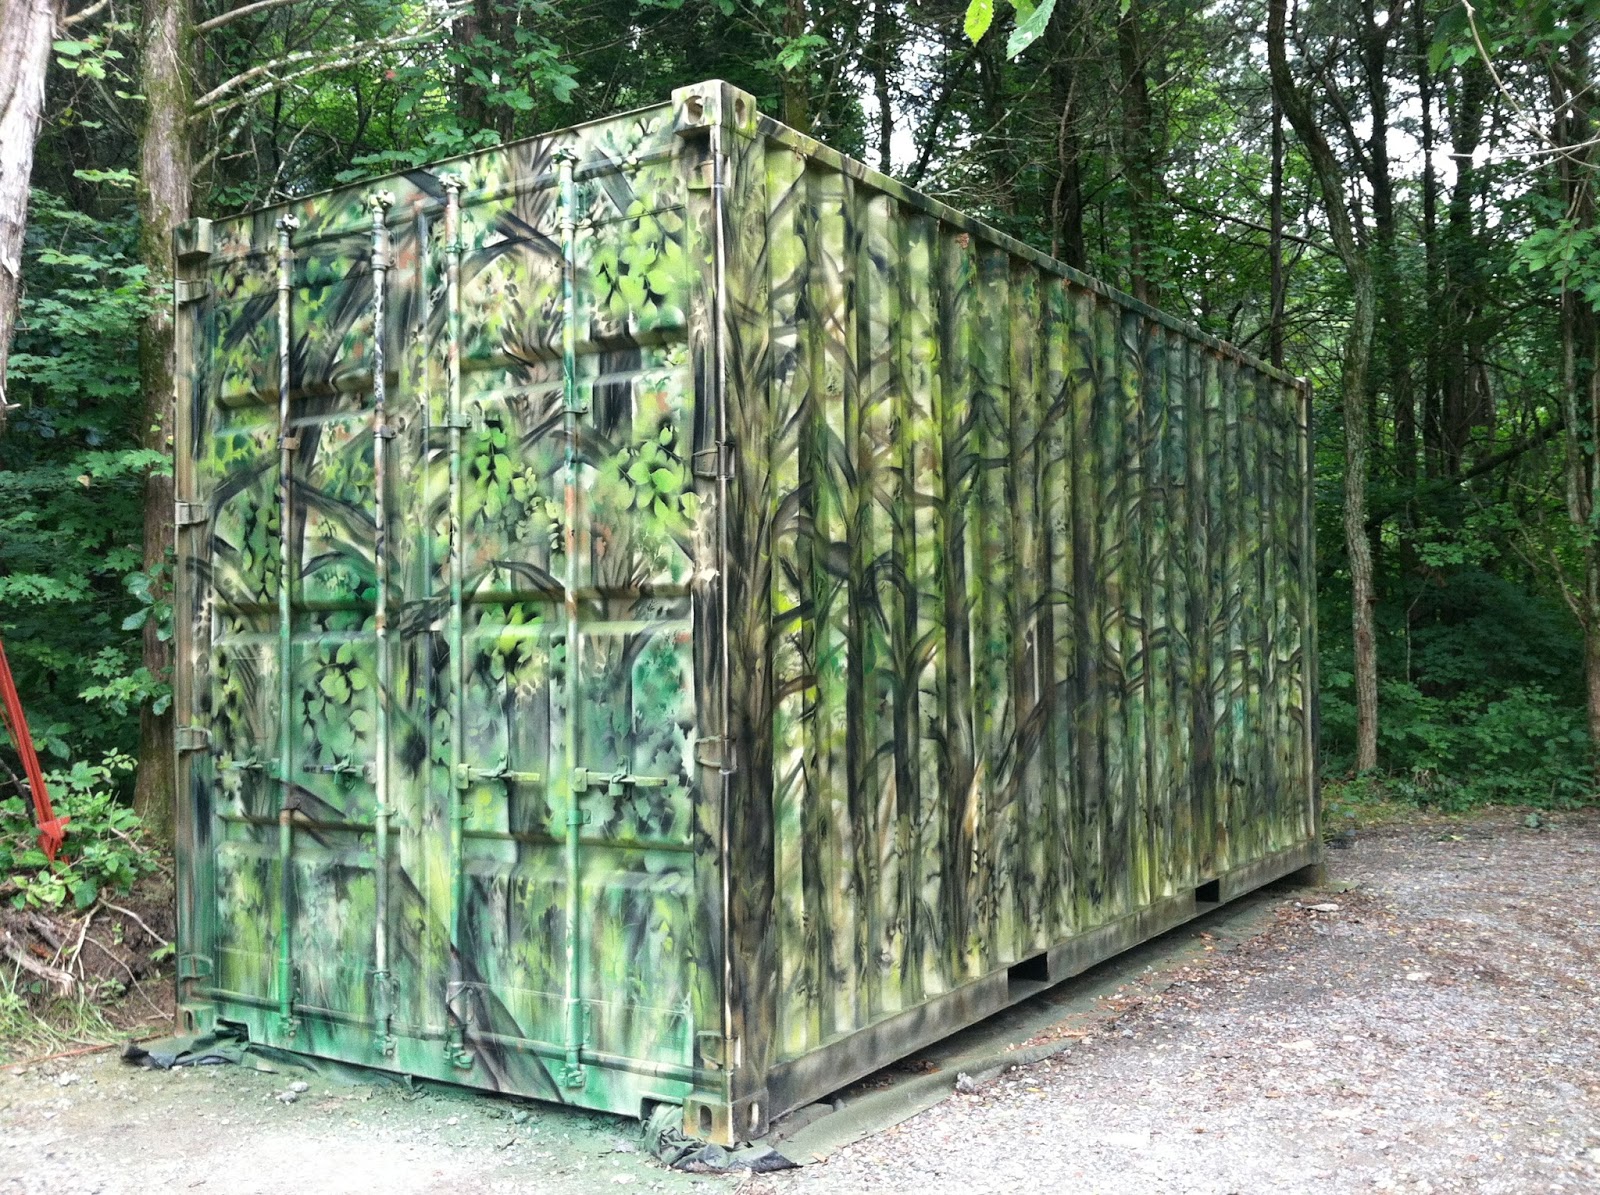 Duff Clothing: TRUE CAMO ON SHIPPING CONTAINER